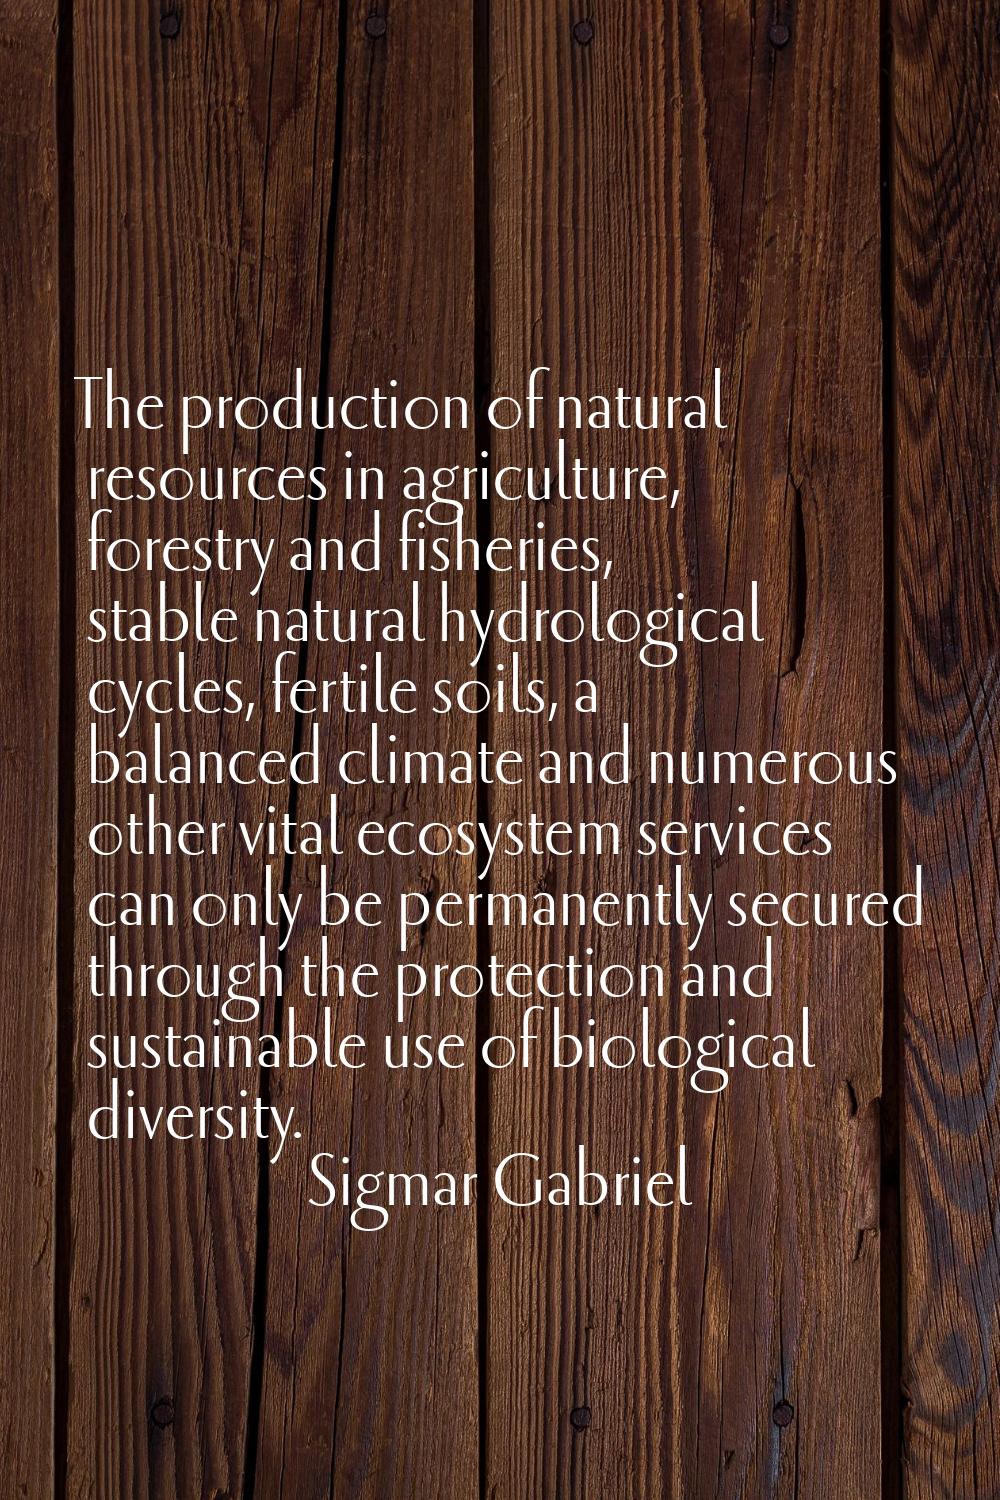 The production of natural resources in agriculture, forestry and fisheries, stable natural hydrolog